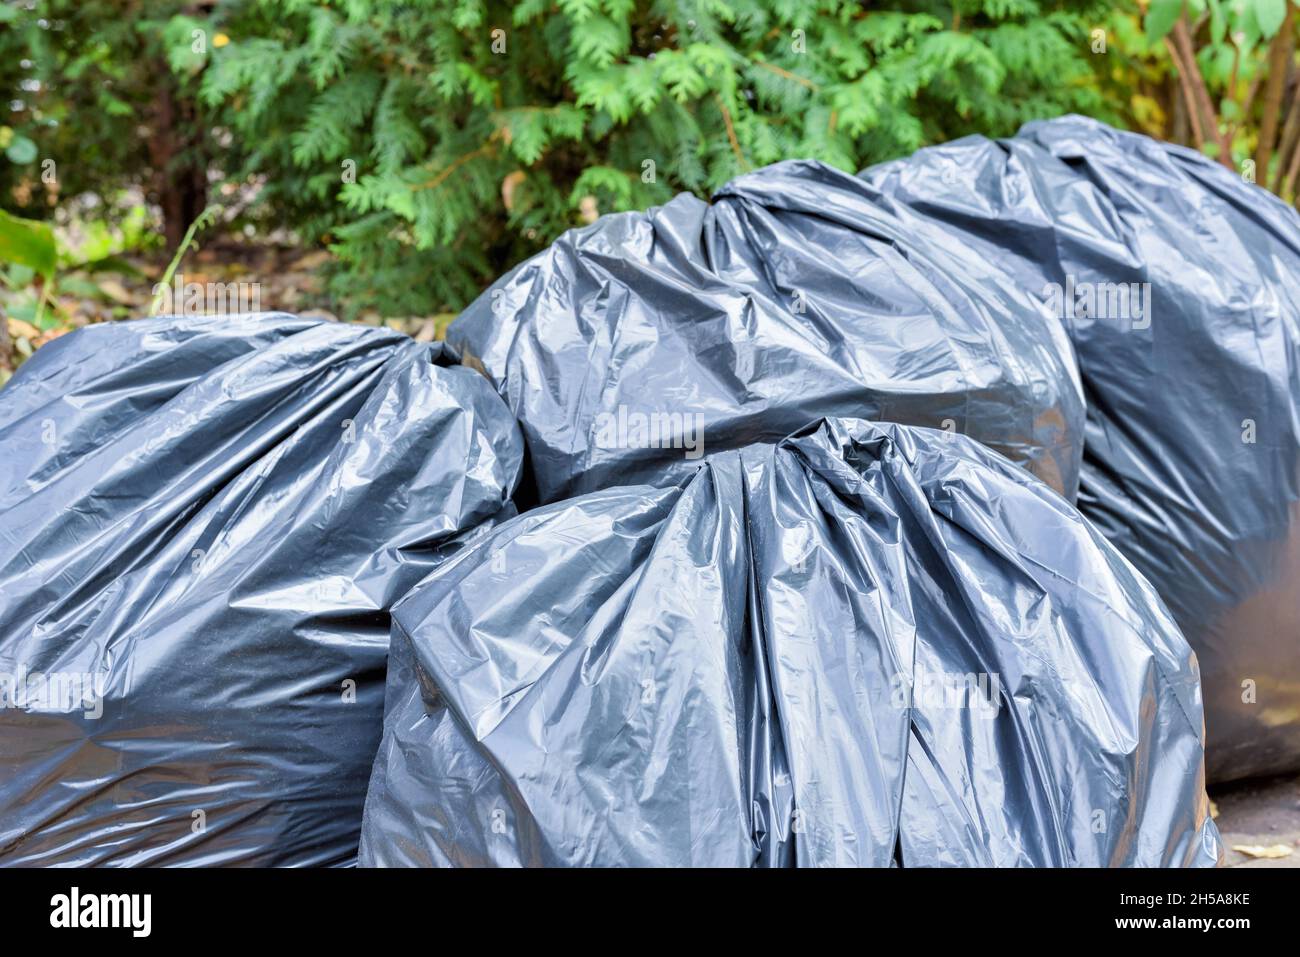 https://c8.alamy.com/comp/2H5A8KE/black-plastic-garbage-bags-after-cleaning-the-garden-seasonal-garbage-collection-and-cleaning-in-the-yard-2H5A8KE.jpg